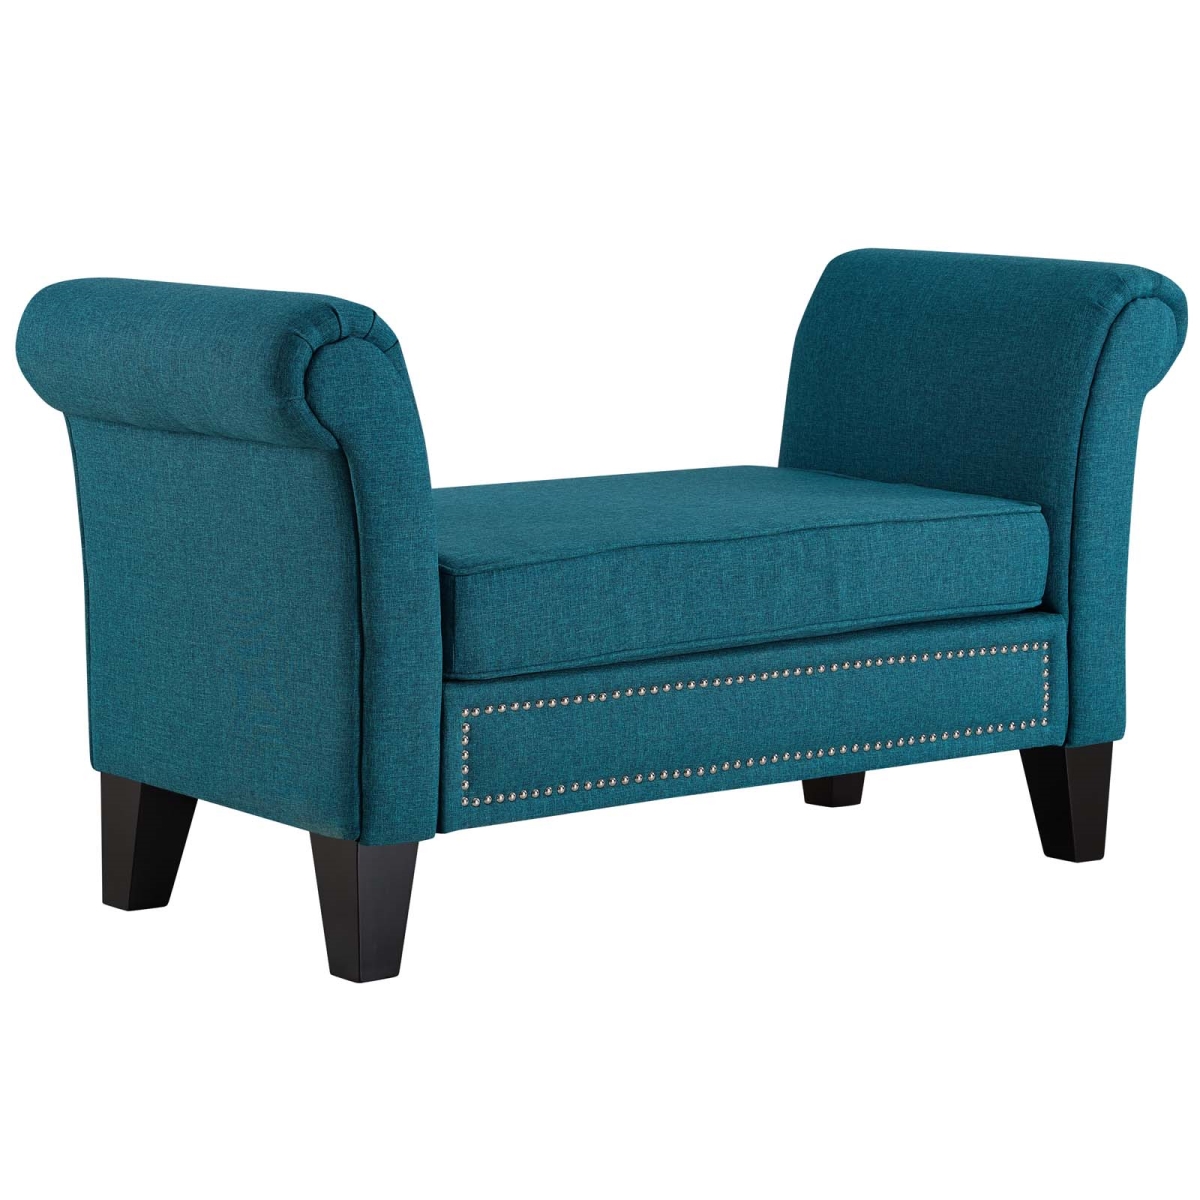 Picture of Modway EEI-2548-TEA Upholstered Fabric Benches - Teal